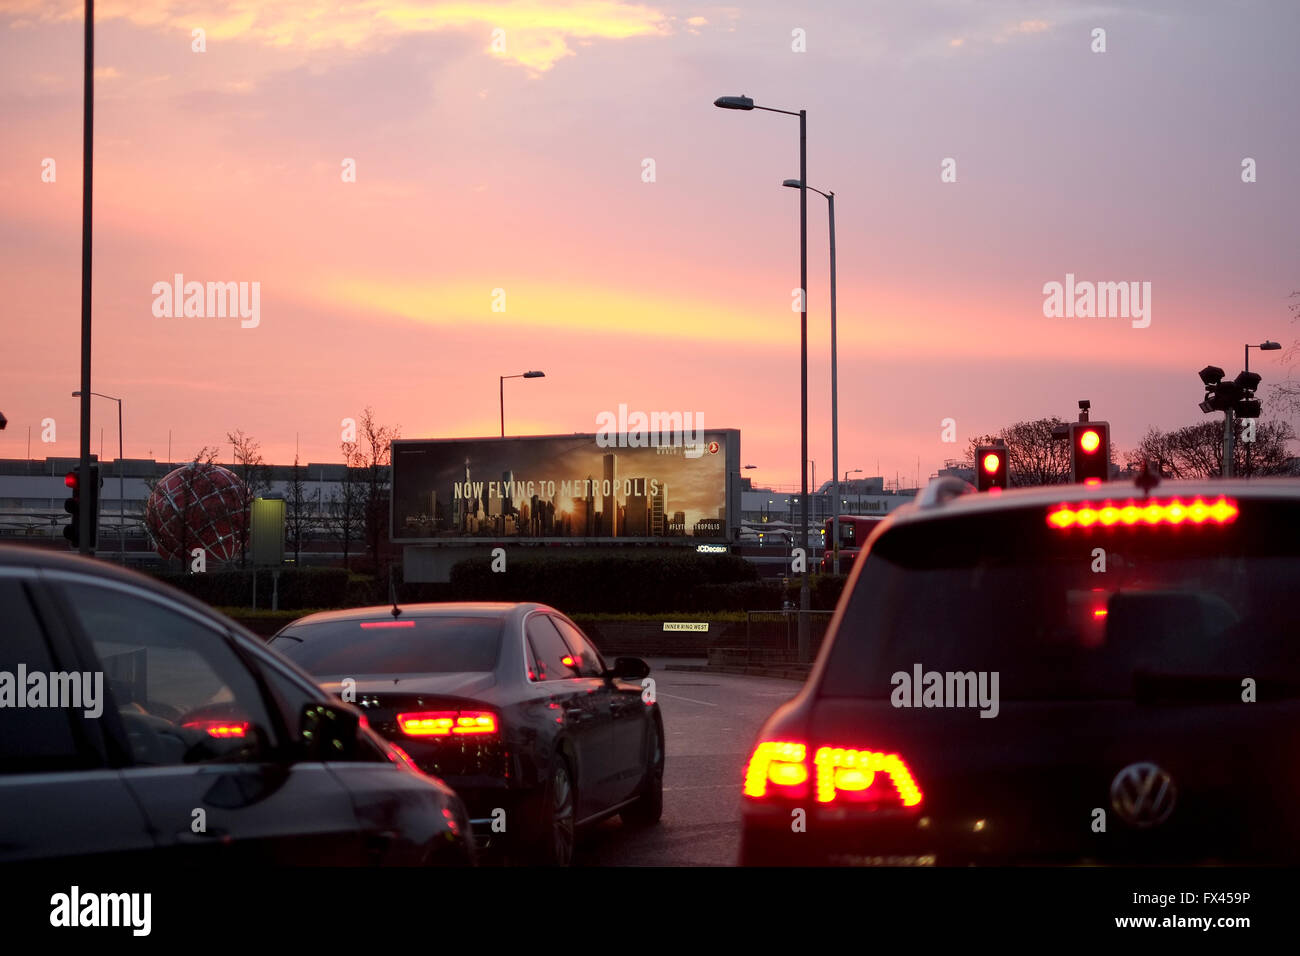 Turkish Airlines billboard on a roundabout at sunrise at Heathrow Airport, London, England, UK. Stock Photo